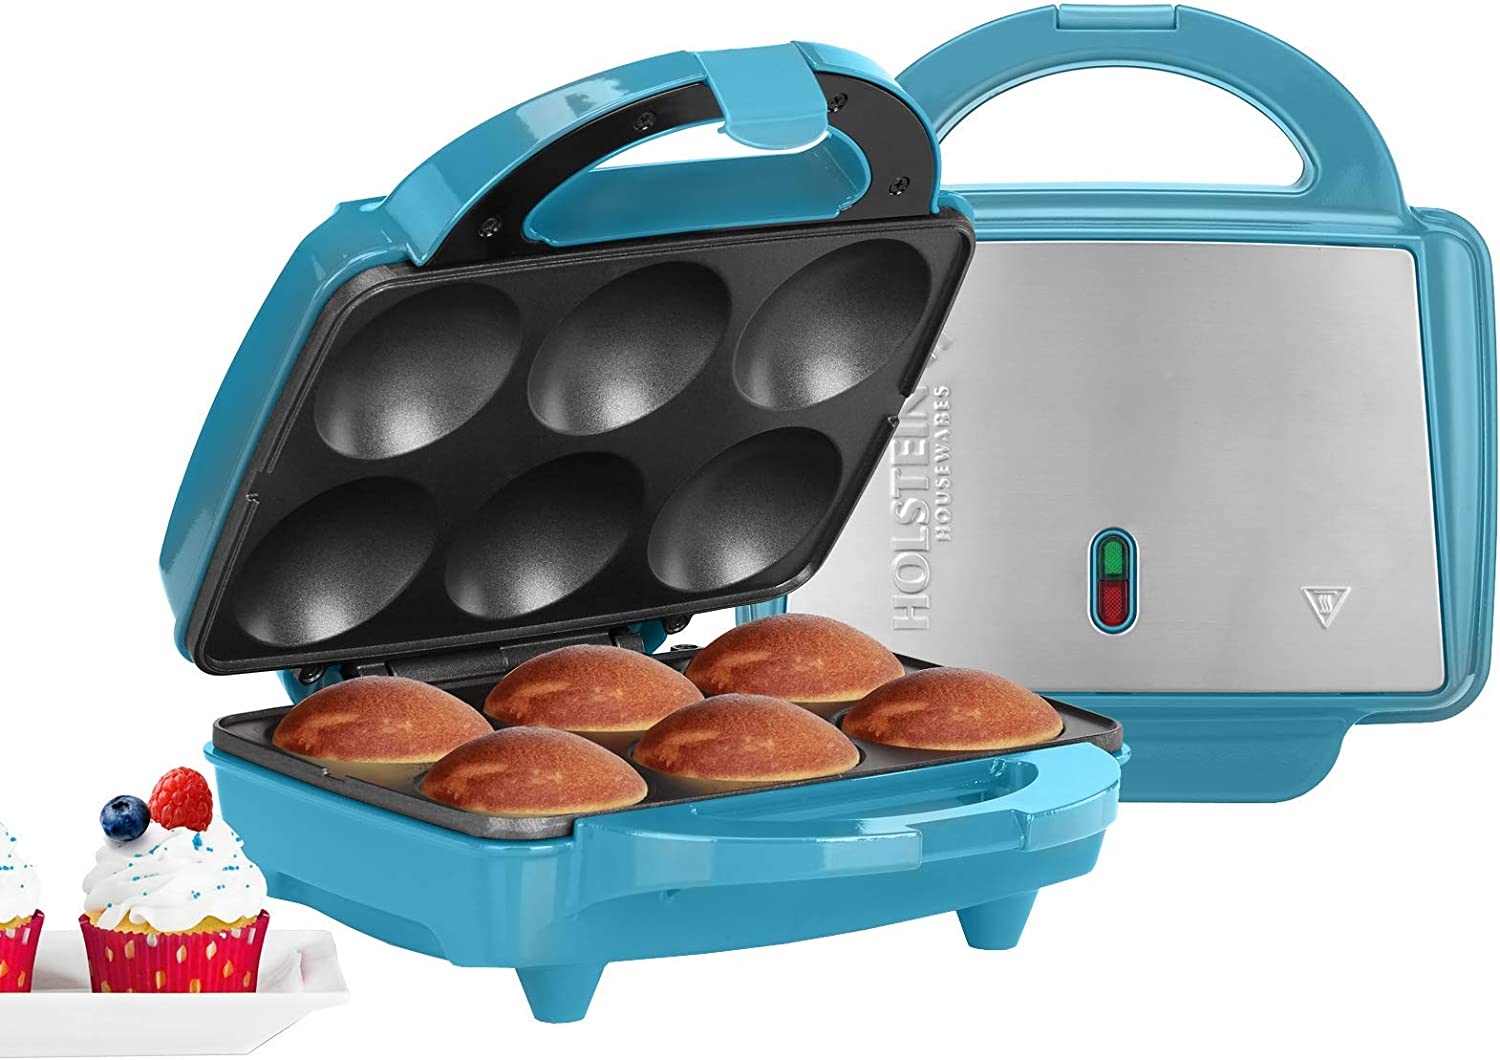 Holstein Housewares Non-Stick Cupcake Maker, Teal – Makes 6 Cupcakes, Muffins, Cinnamon Buns – Birthdays, Holidays, and More